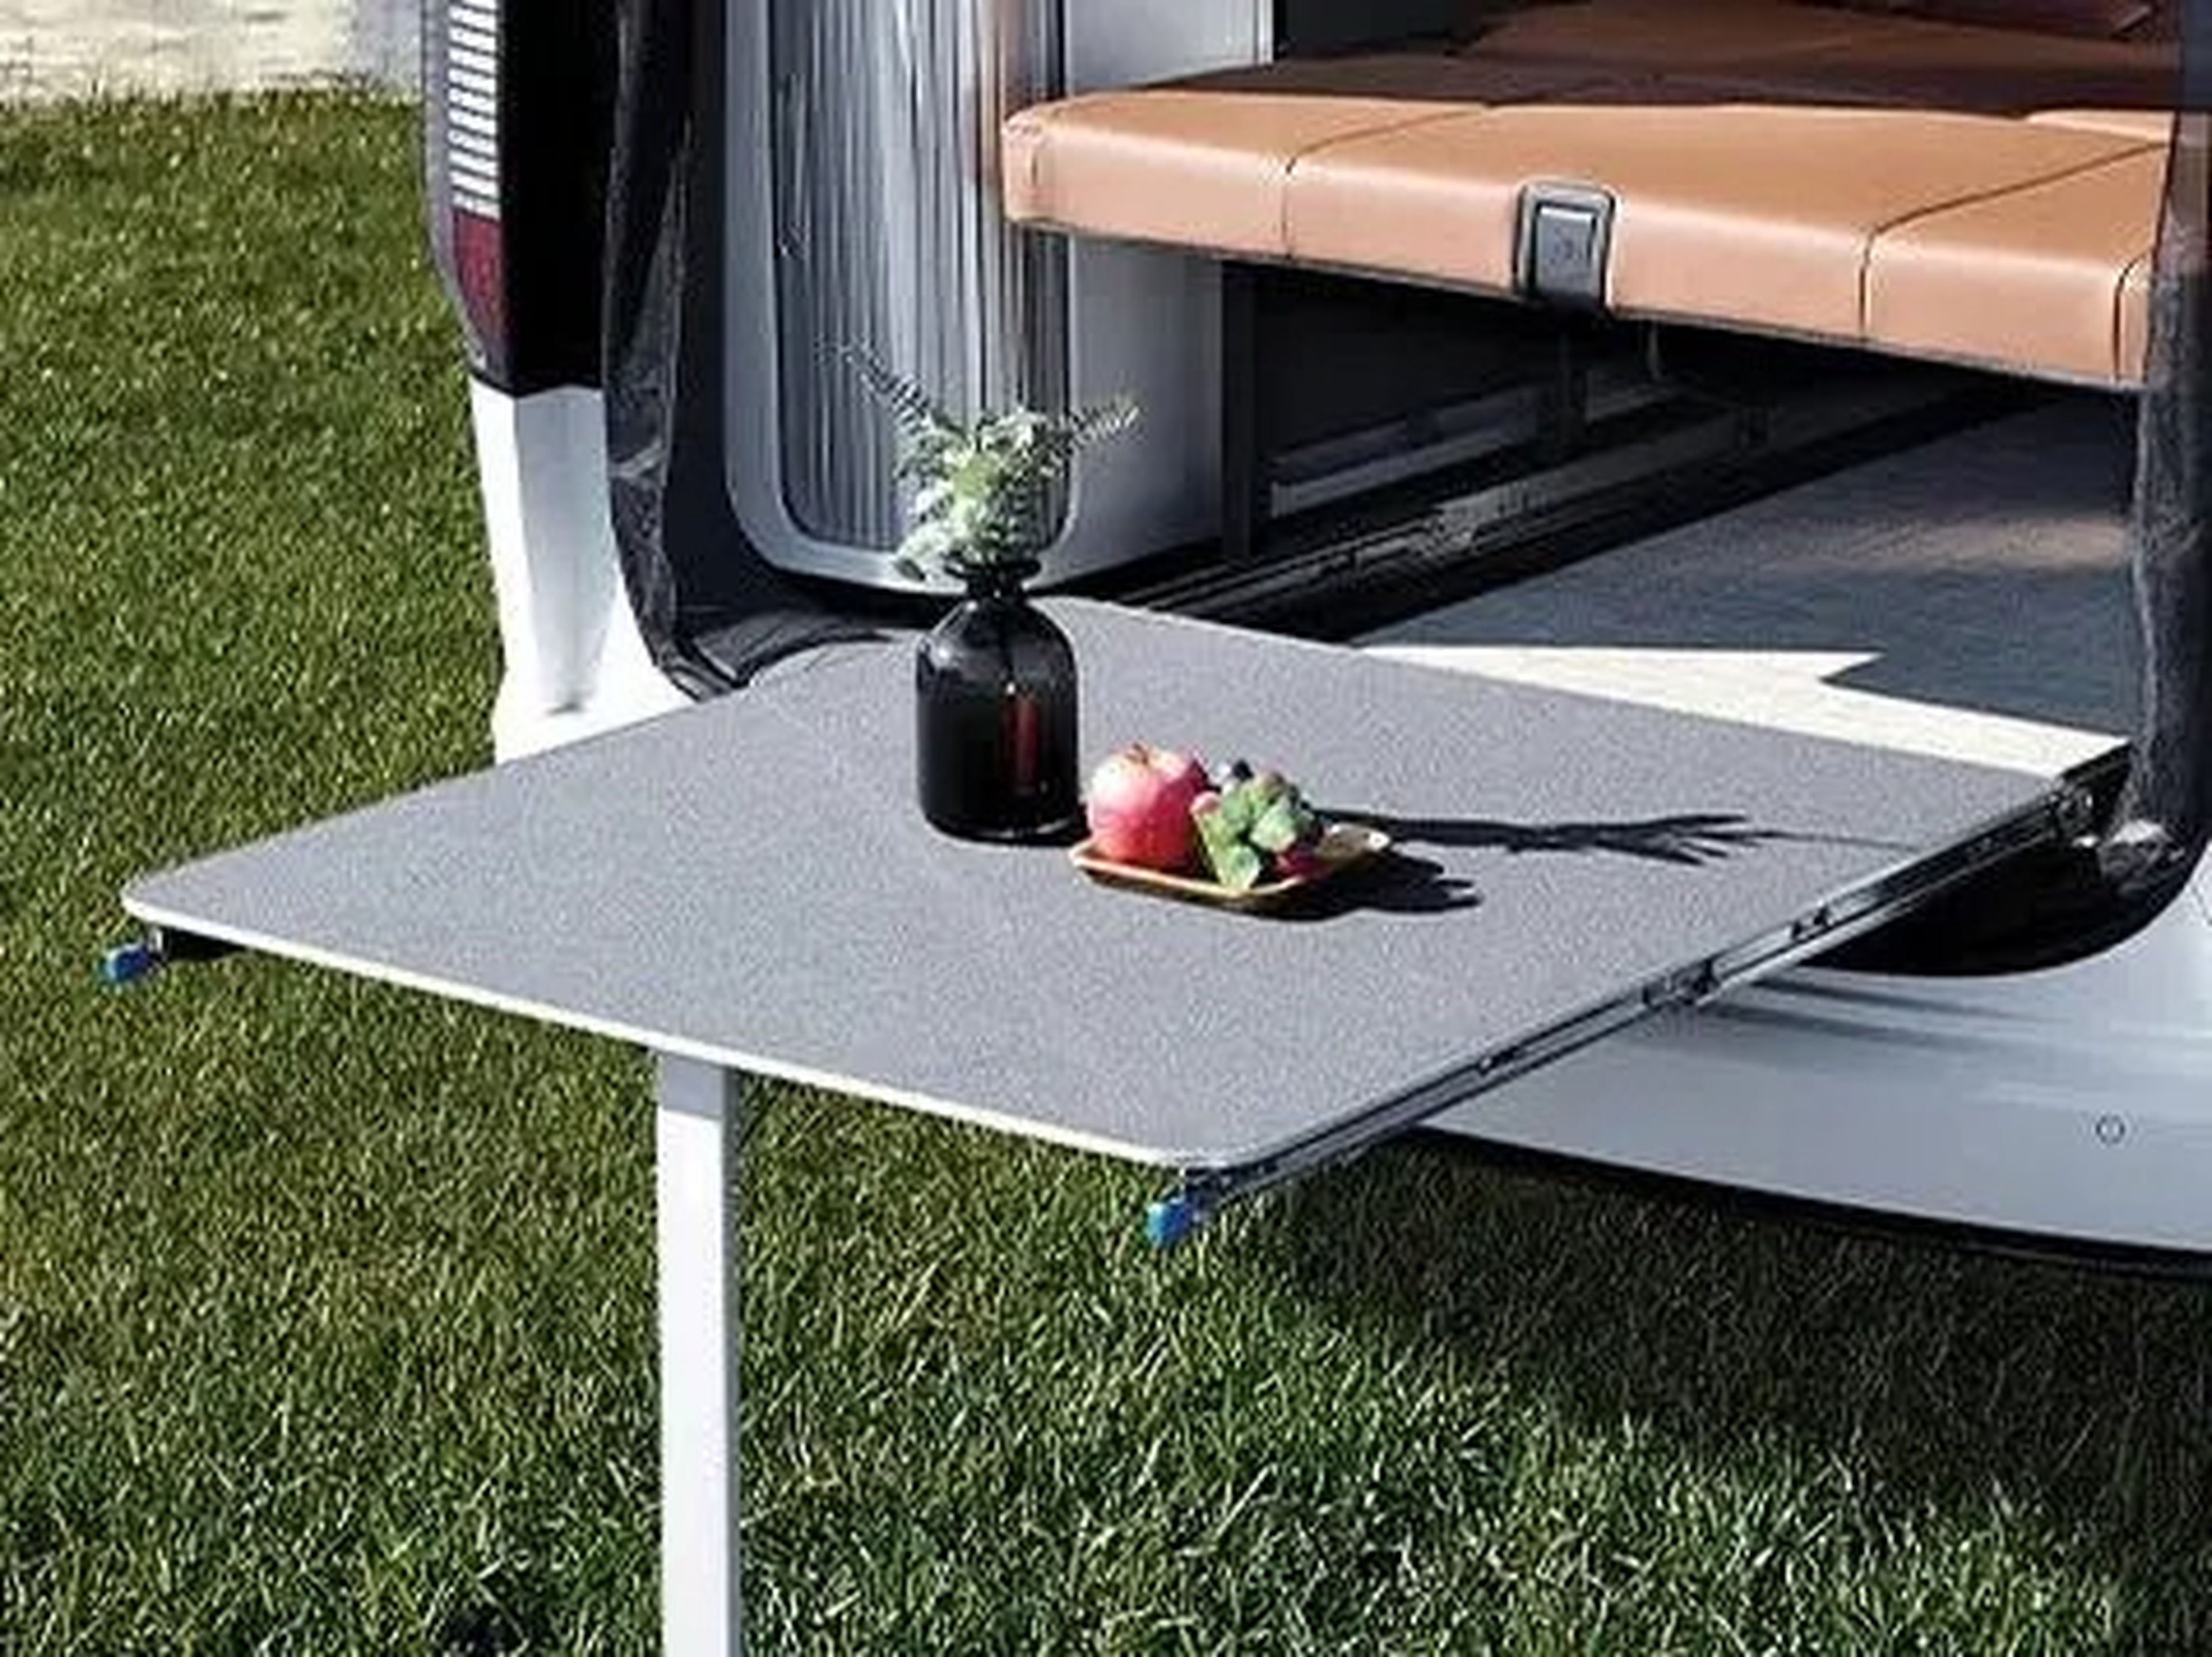 The Hyundai Staria Lounge Camper's exterior table hanging out the back of the minivan.